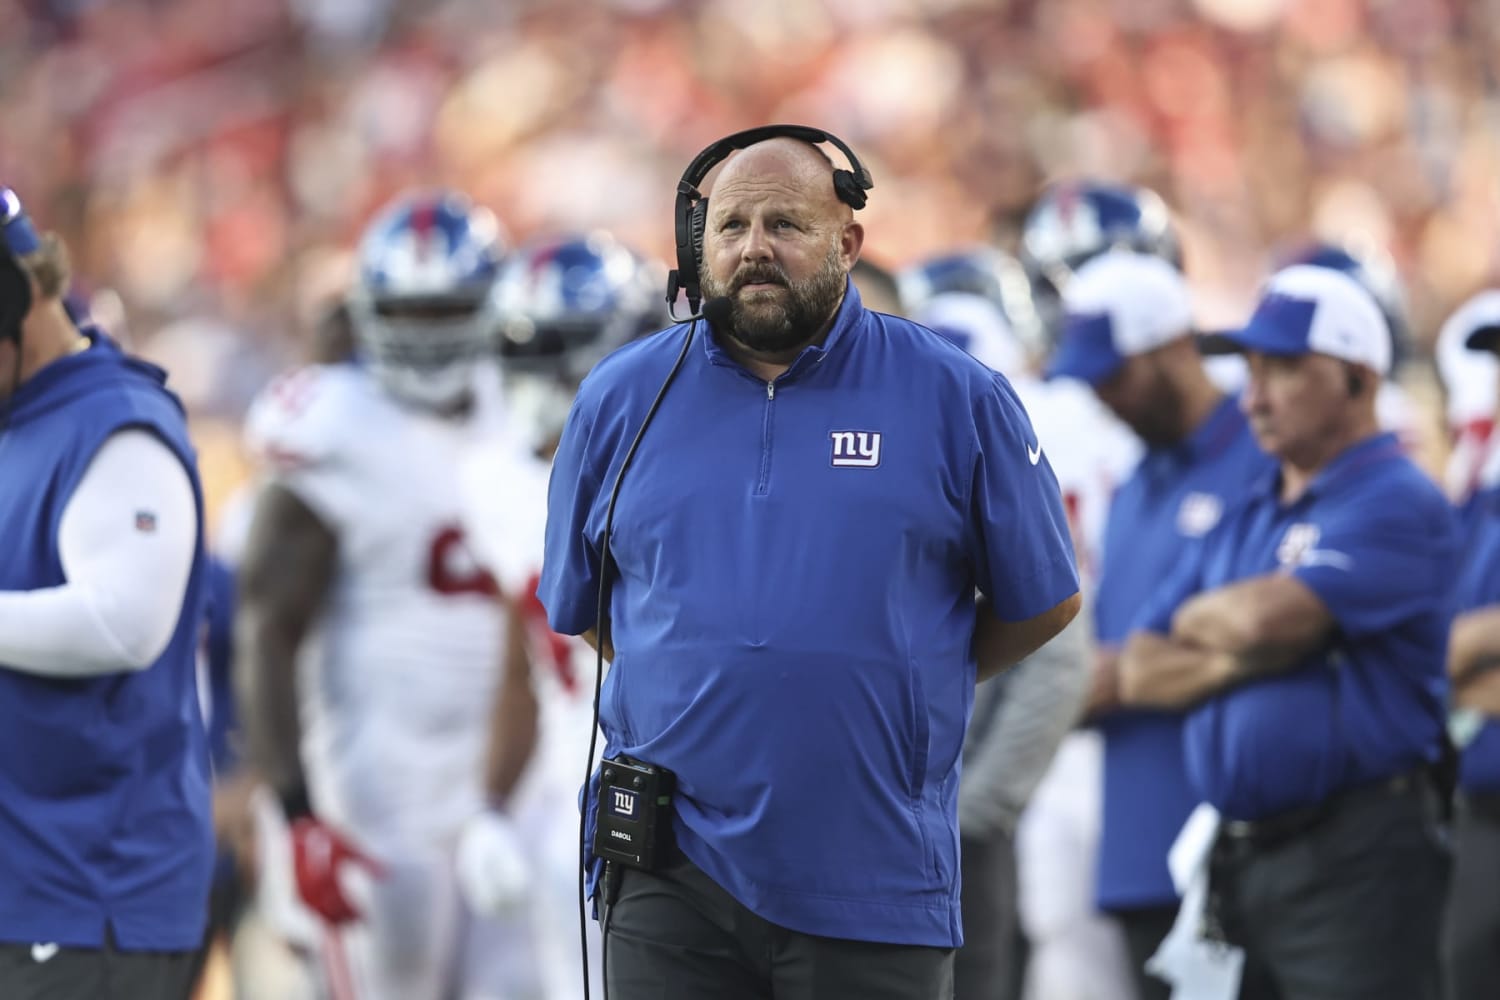 New York Giants uniform news and player numbers - Big Blue View